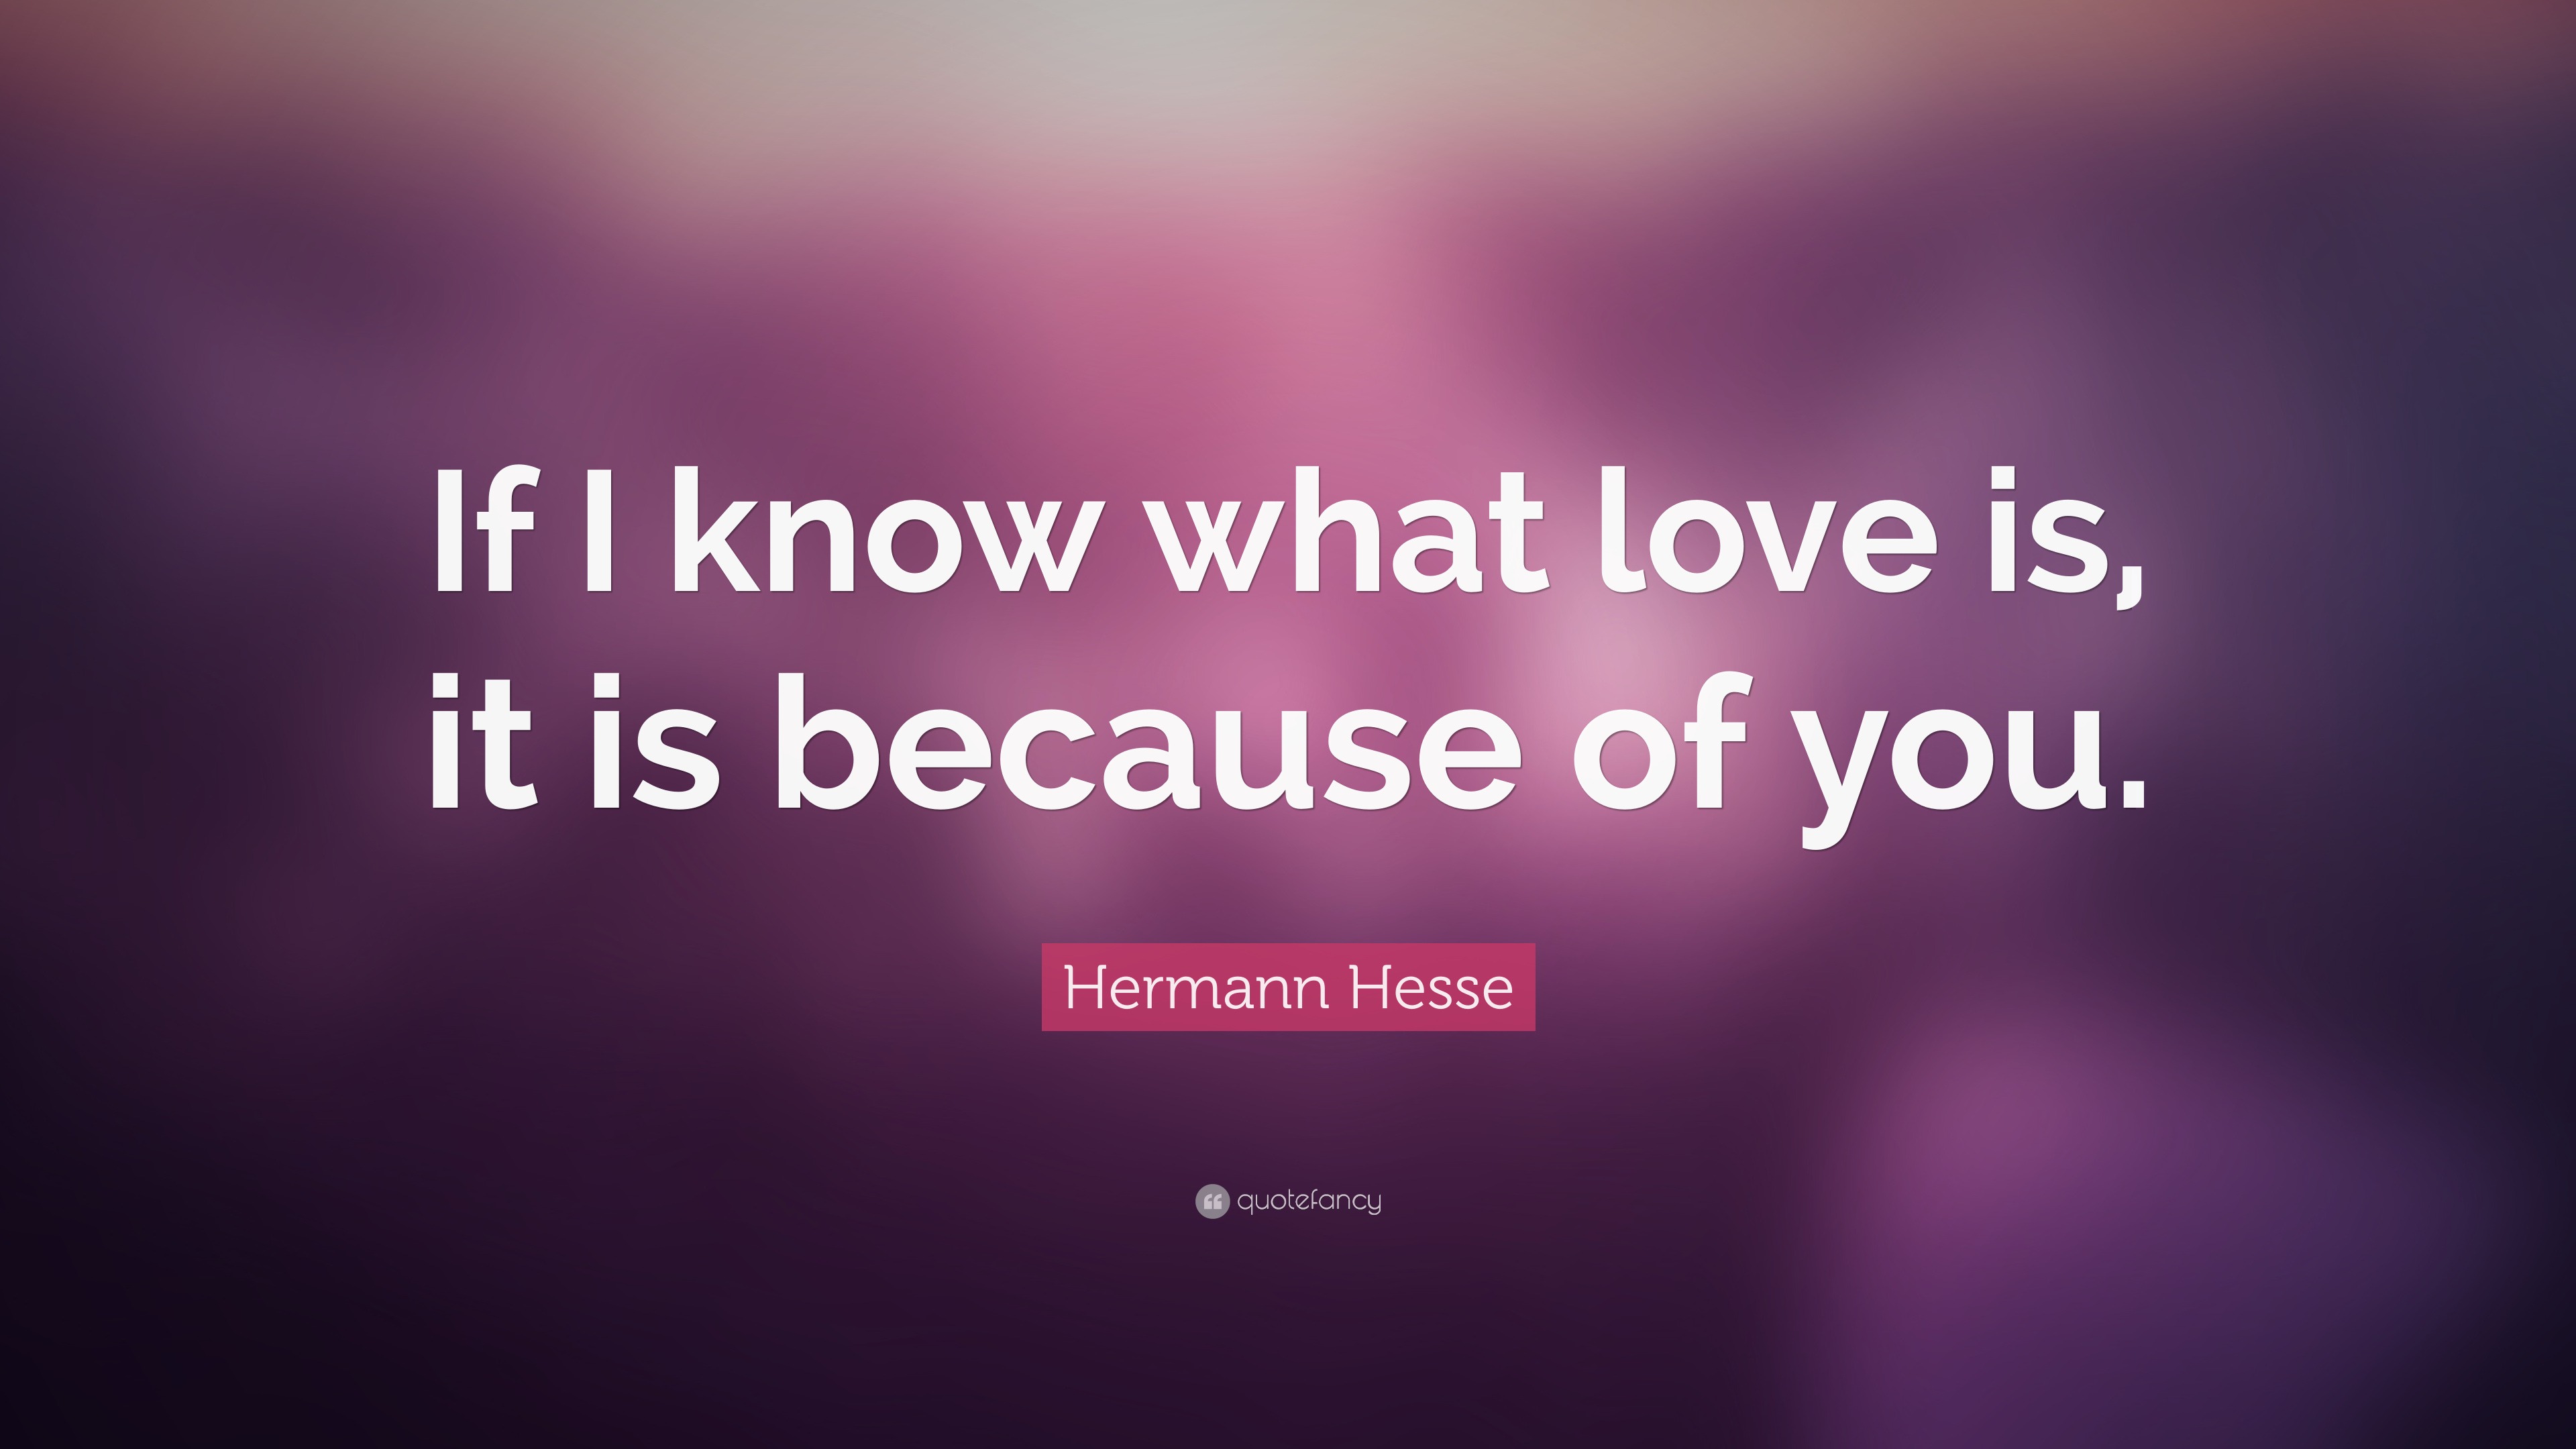 Hermann Hesse Quote: "If I know what love is, it is because of you." (12 wallpapers) - Quotefancy